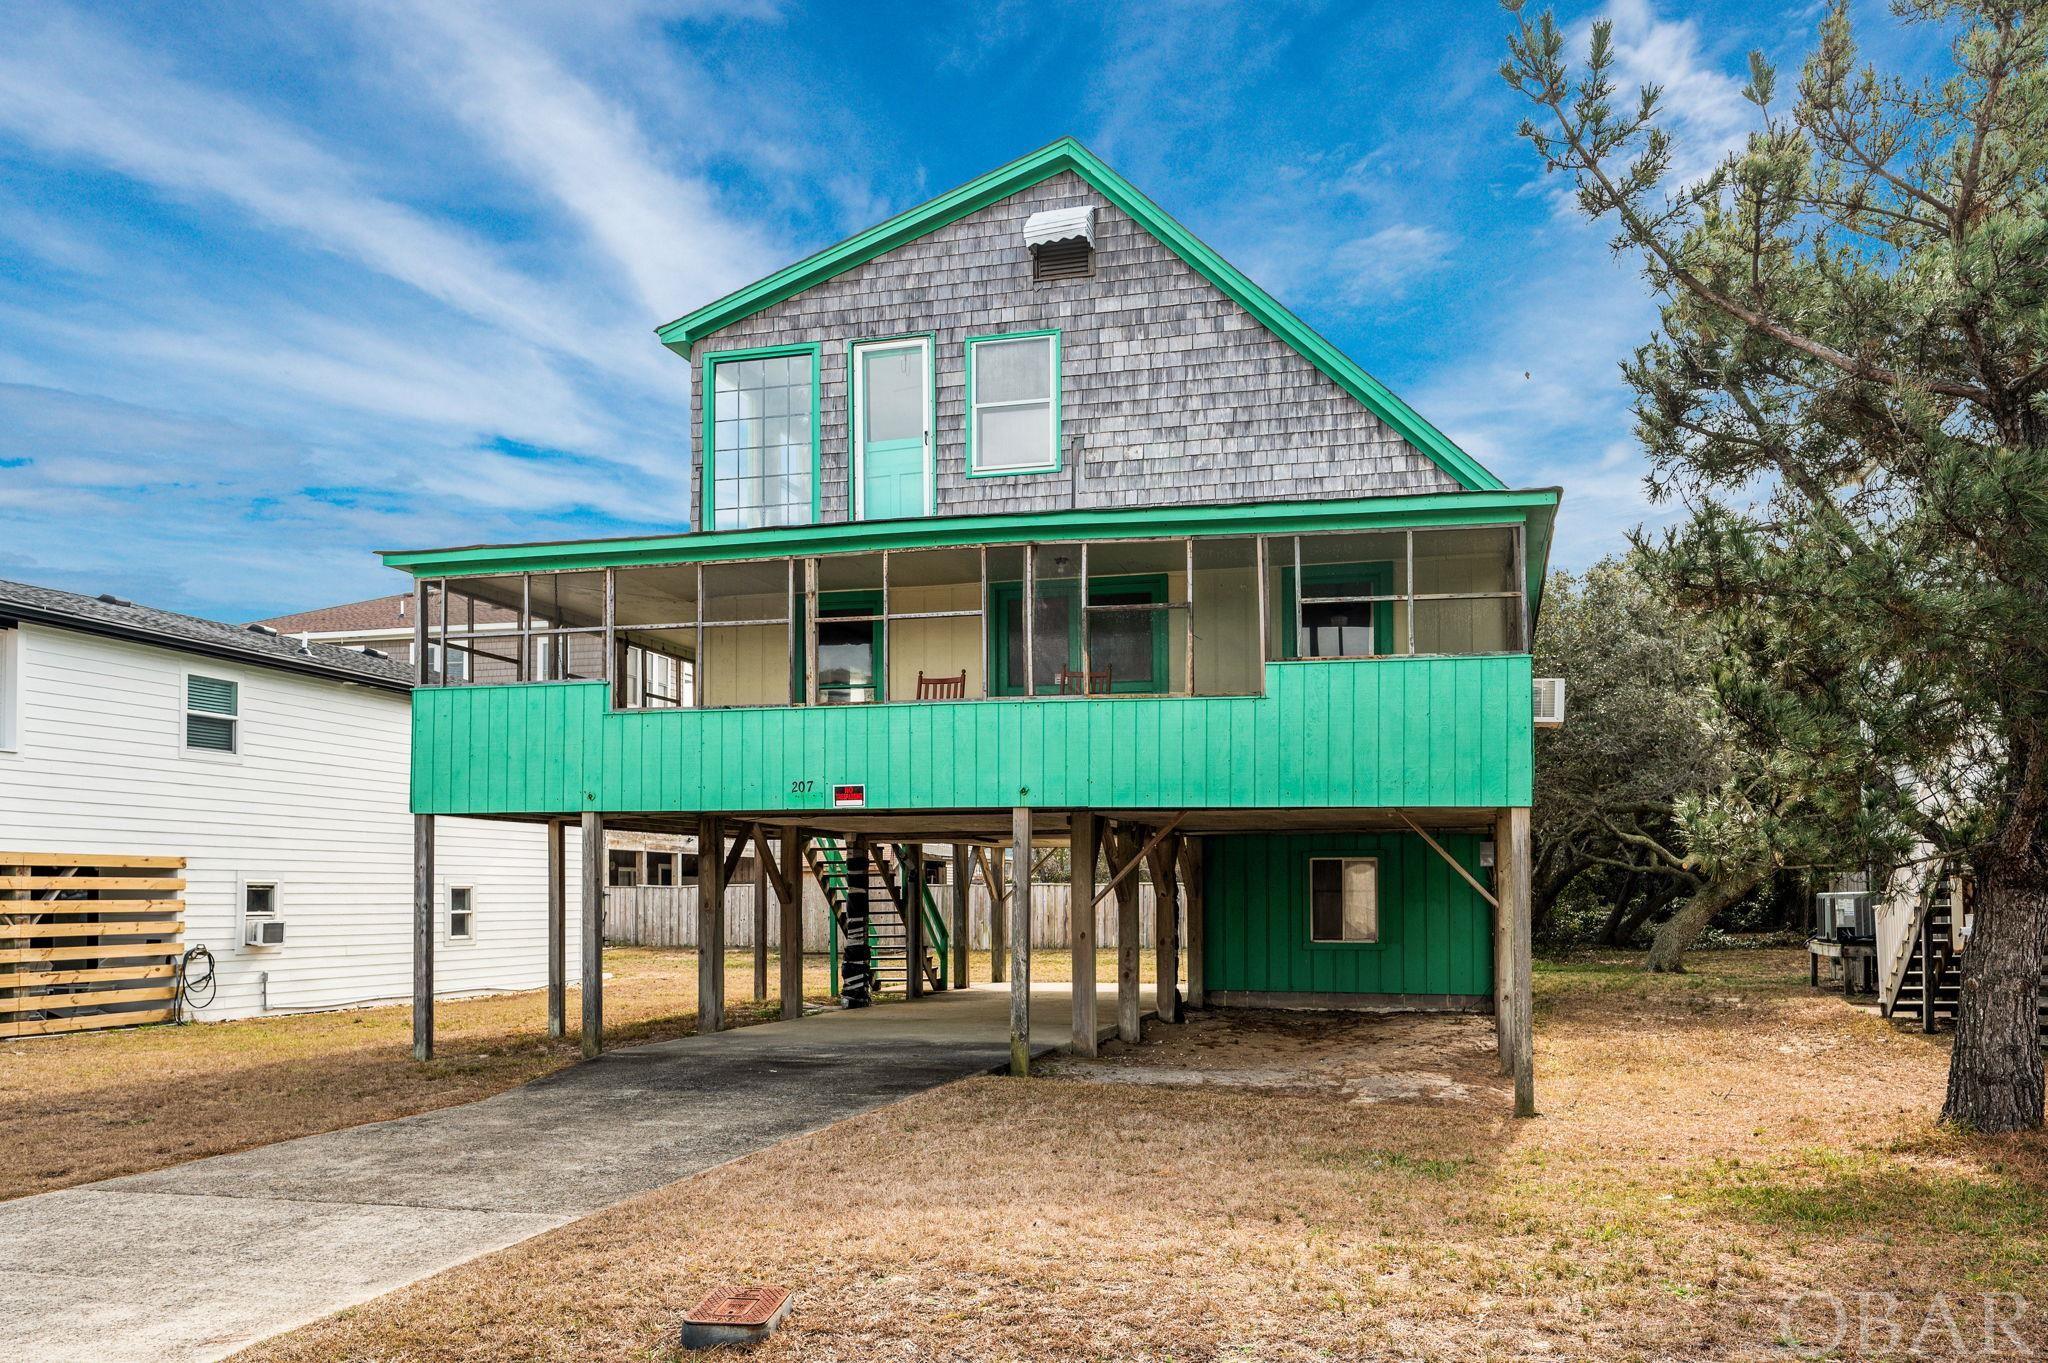 Classic cottage, in a Spectacular location between Bonnett St. beach access and Dowdy Park in Nags Head! Home is being sold As-Is, remodel and make it your own Nags Head beach getaway!!  Easy walk to the beach, to Dowdy Park, YMCA, shopping and more!